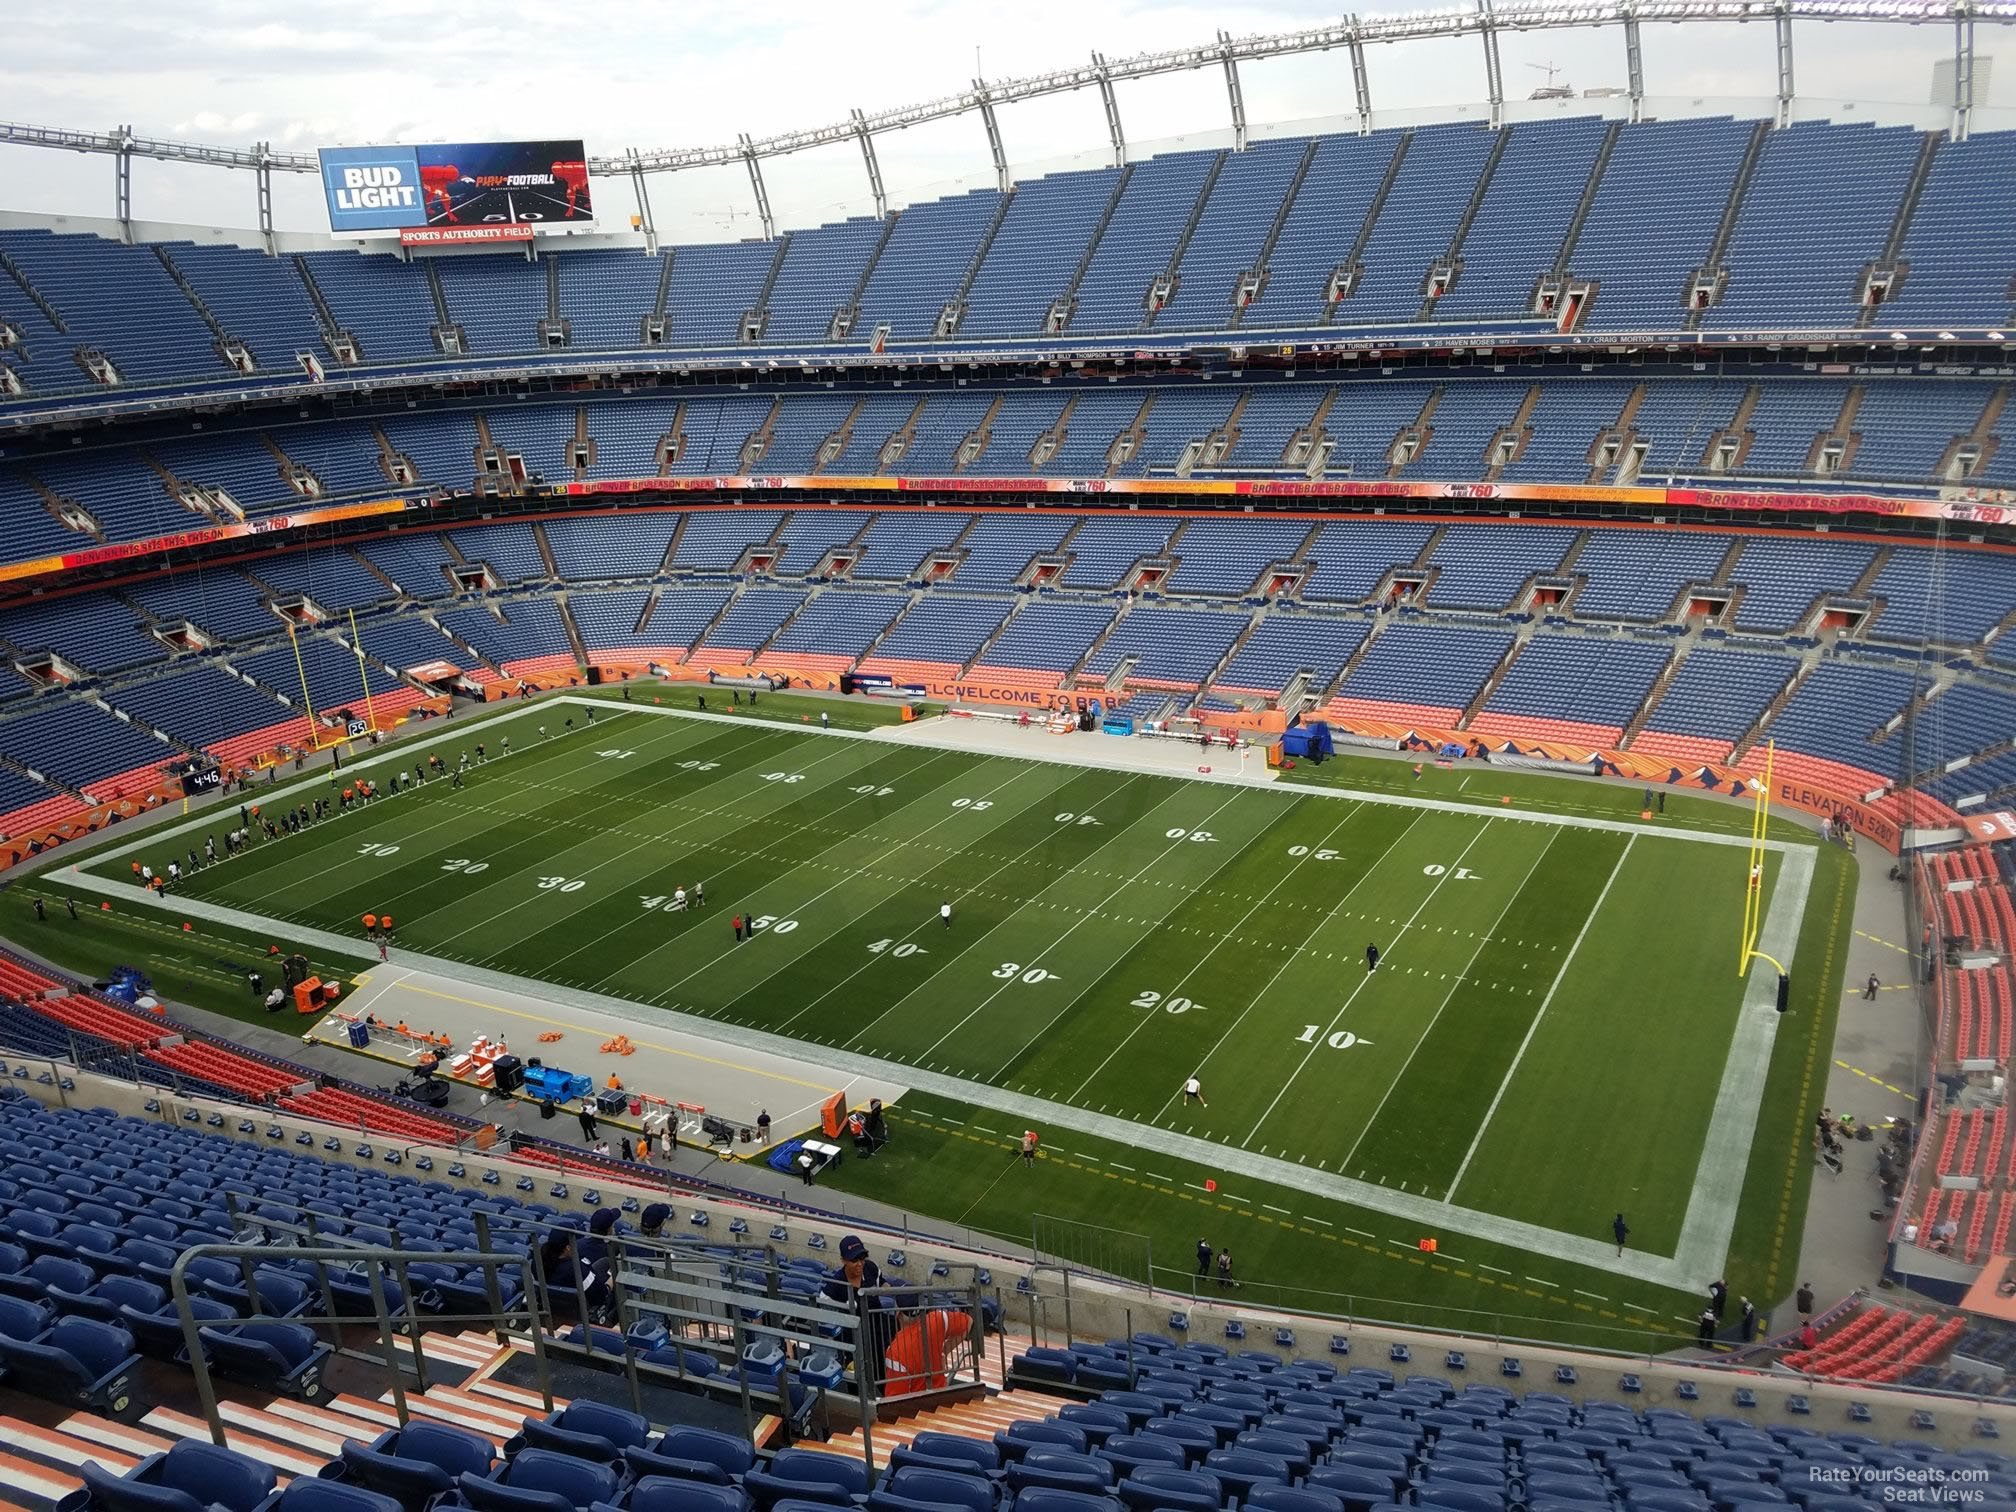 section 503, row 16 seat view  - empower field (at mile high)